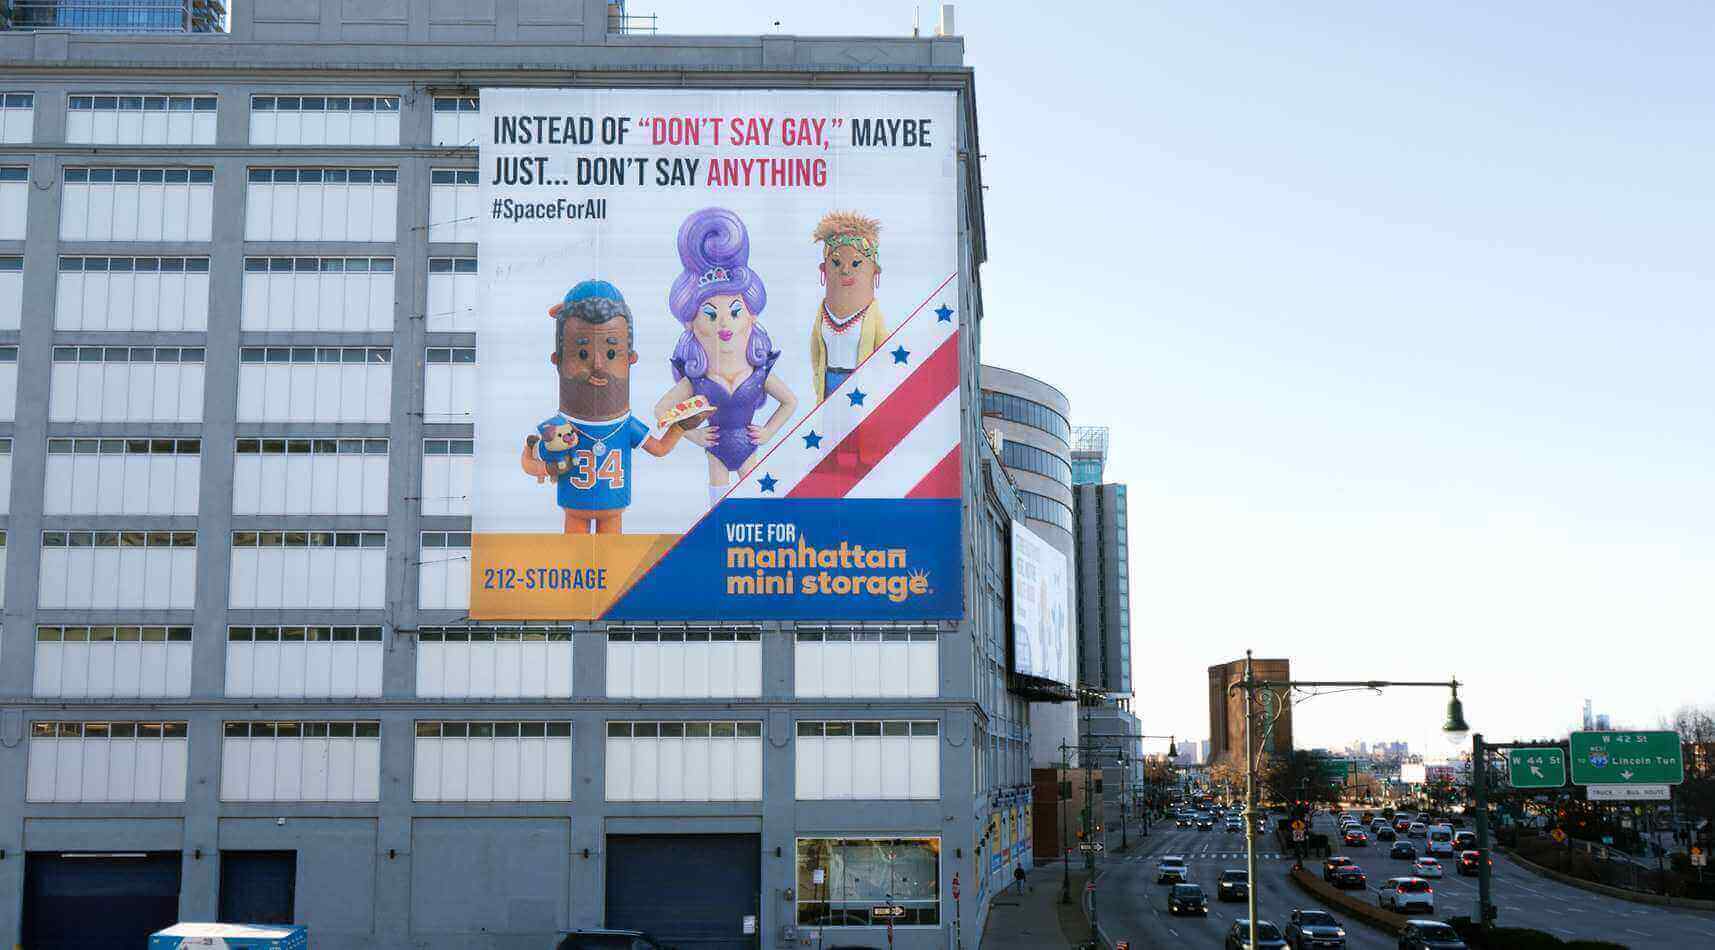 Manhattan Mini Storage Billboards - Dont Say Gay, Just Dont Say Anything